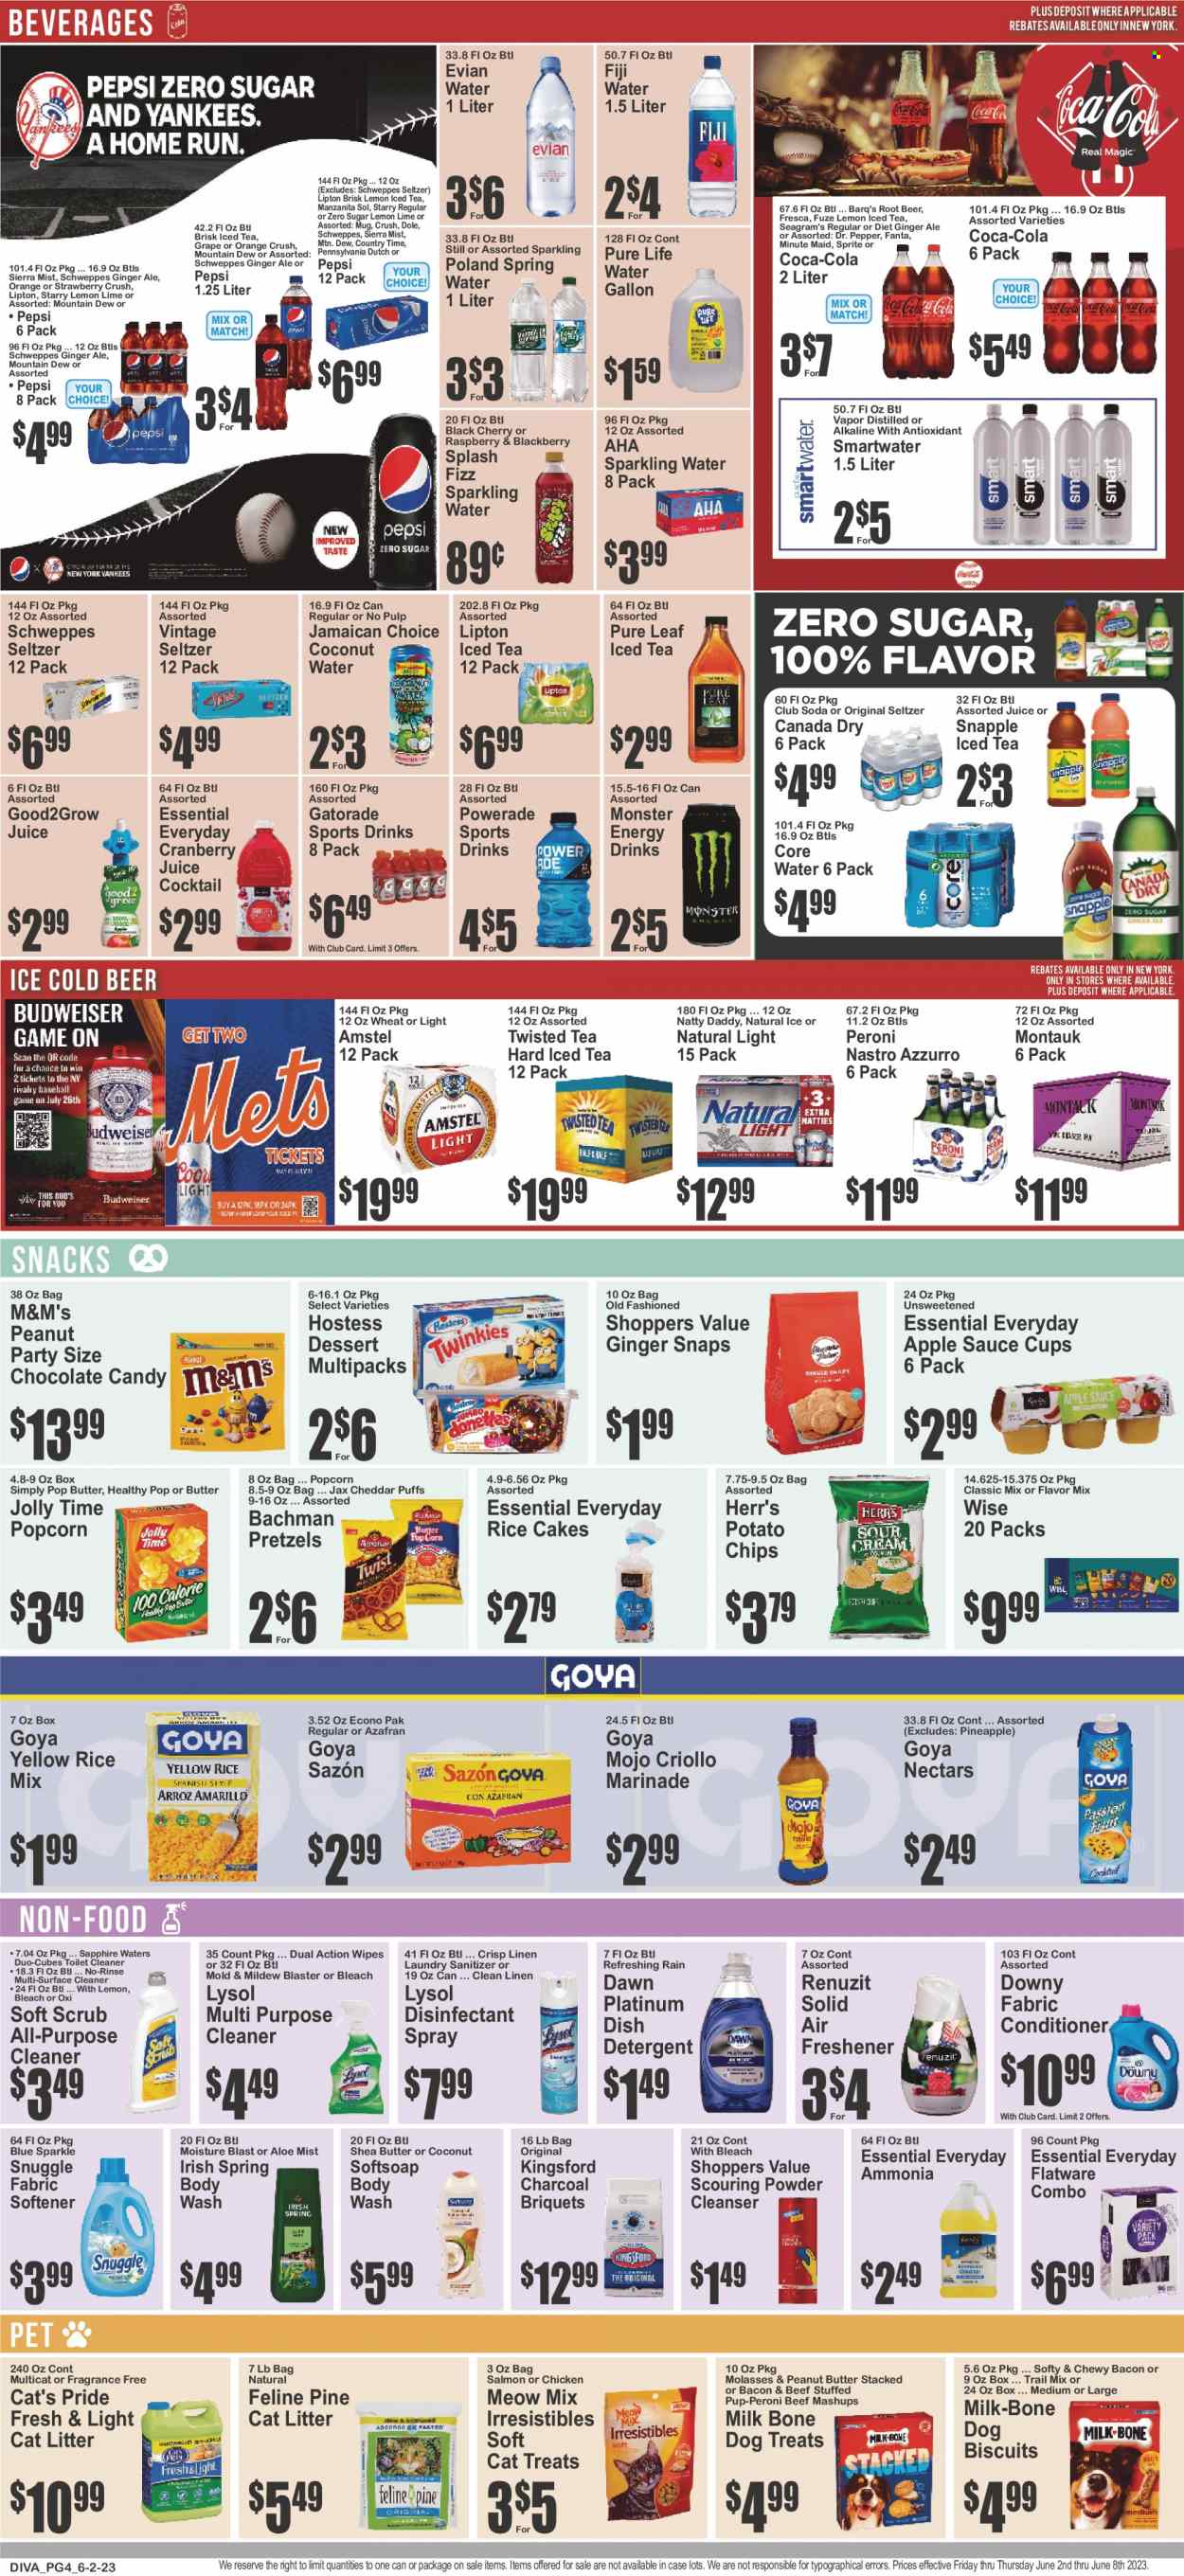 thumbnail - Food Dynasty Flyer - 06/02/2023 - 06/08/2023 - Sales products - pretzels, puffs, dessert, Dole, cherries, oranges, salmon, sauce, Kingsford, snack, cheese, M&M's, chocolate candies, Candy, potato chips, chips, popcorn, Goya, marinade, apple sauce, molasses, peanut butter, trail mix, Canada Dry, Coca-Cola, cranberry juice, ginger ale, Mountain Dew, Schweppes, Sprite, Powerade, Pepsi, juice, Fanta, energy drink, Monster, Lipton, ice tea, Dr. Pepper, coconut water, soft drink, Monster Energy, Snapple, Sierra Mist, Country Time, Gatorade, fruit punch, Club Soda, seltzer water, spring water, sparkling water, Pure Life Water, Smartwater, Evian, water, Pure Leaf, beer, Sol, Amstel, wipes, detergent, surface cleaner, cleaner, desinfection, toilet cleaner, Lysol, Snuggle, fabric softener, laundry detergent, Downy Laundry, dishwasher cleaner, body wash, Softsoap, cleanser, shea butter, antibacterial spray, flatware, mug, Renuzit, air freshener, cat litter, animal treats, dog food, dog biscuits, Pup-Peroni, Meow Mix, briquettes, charcoal, electrolyte drink, Twisted Tea. Page 4.